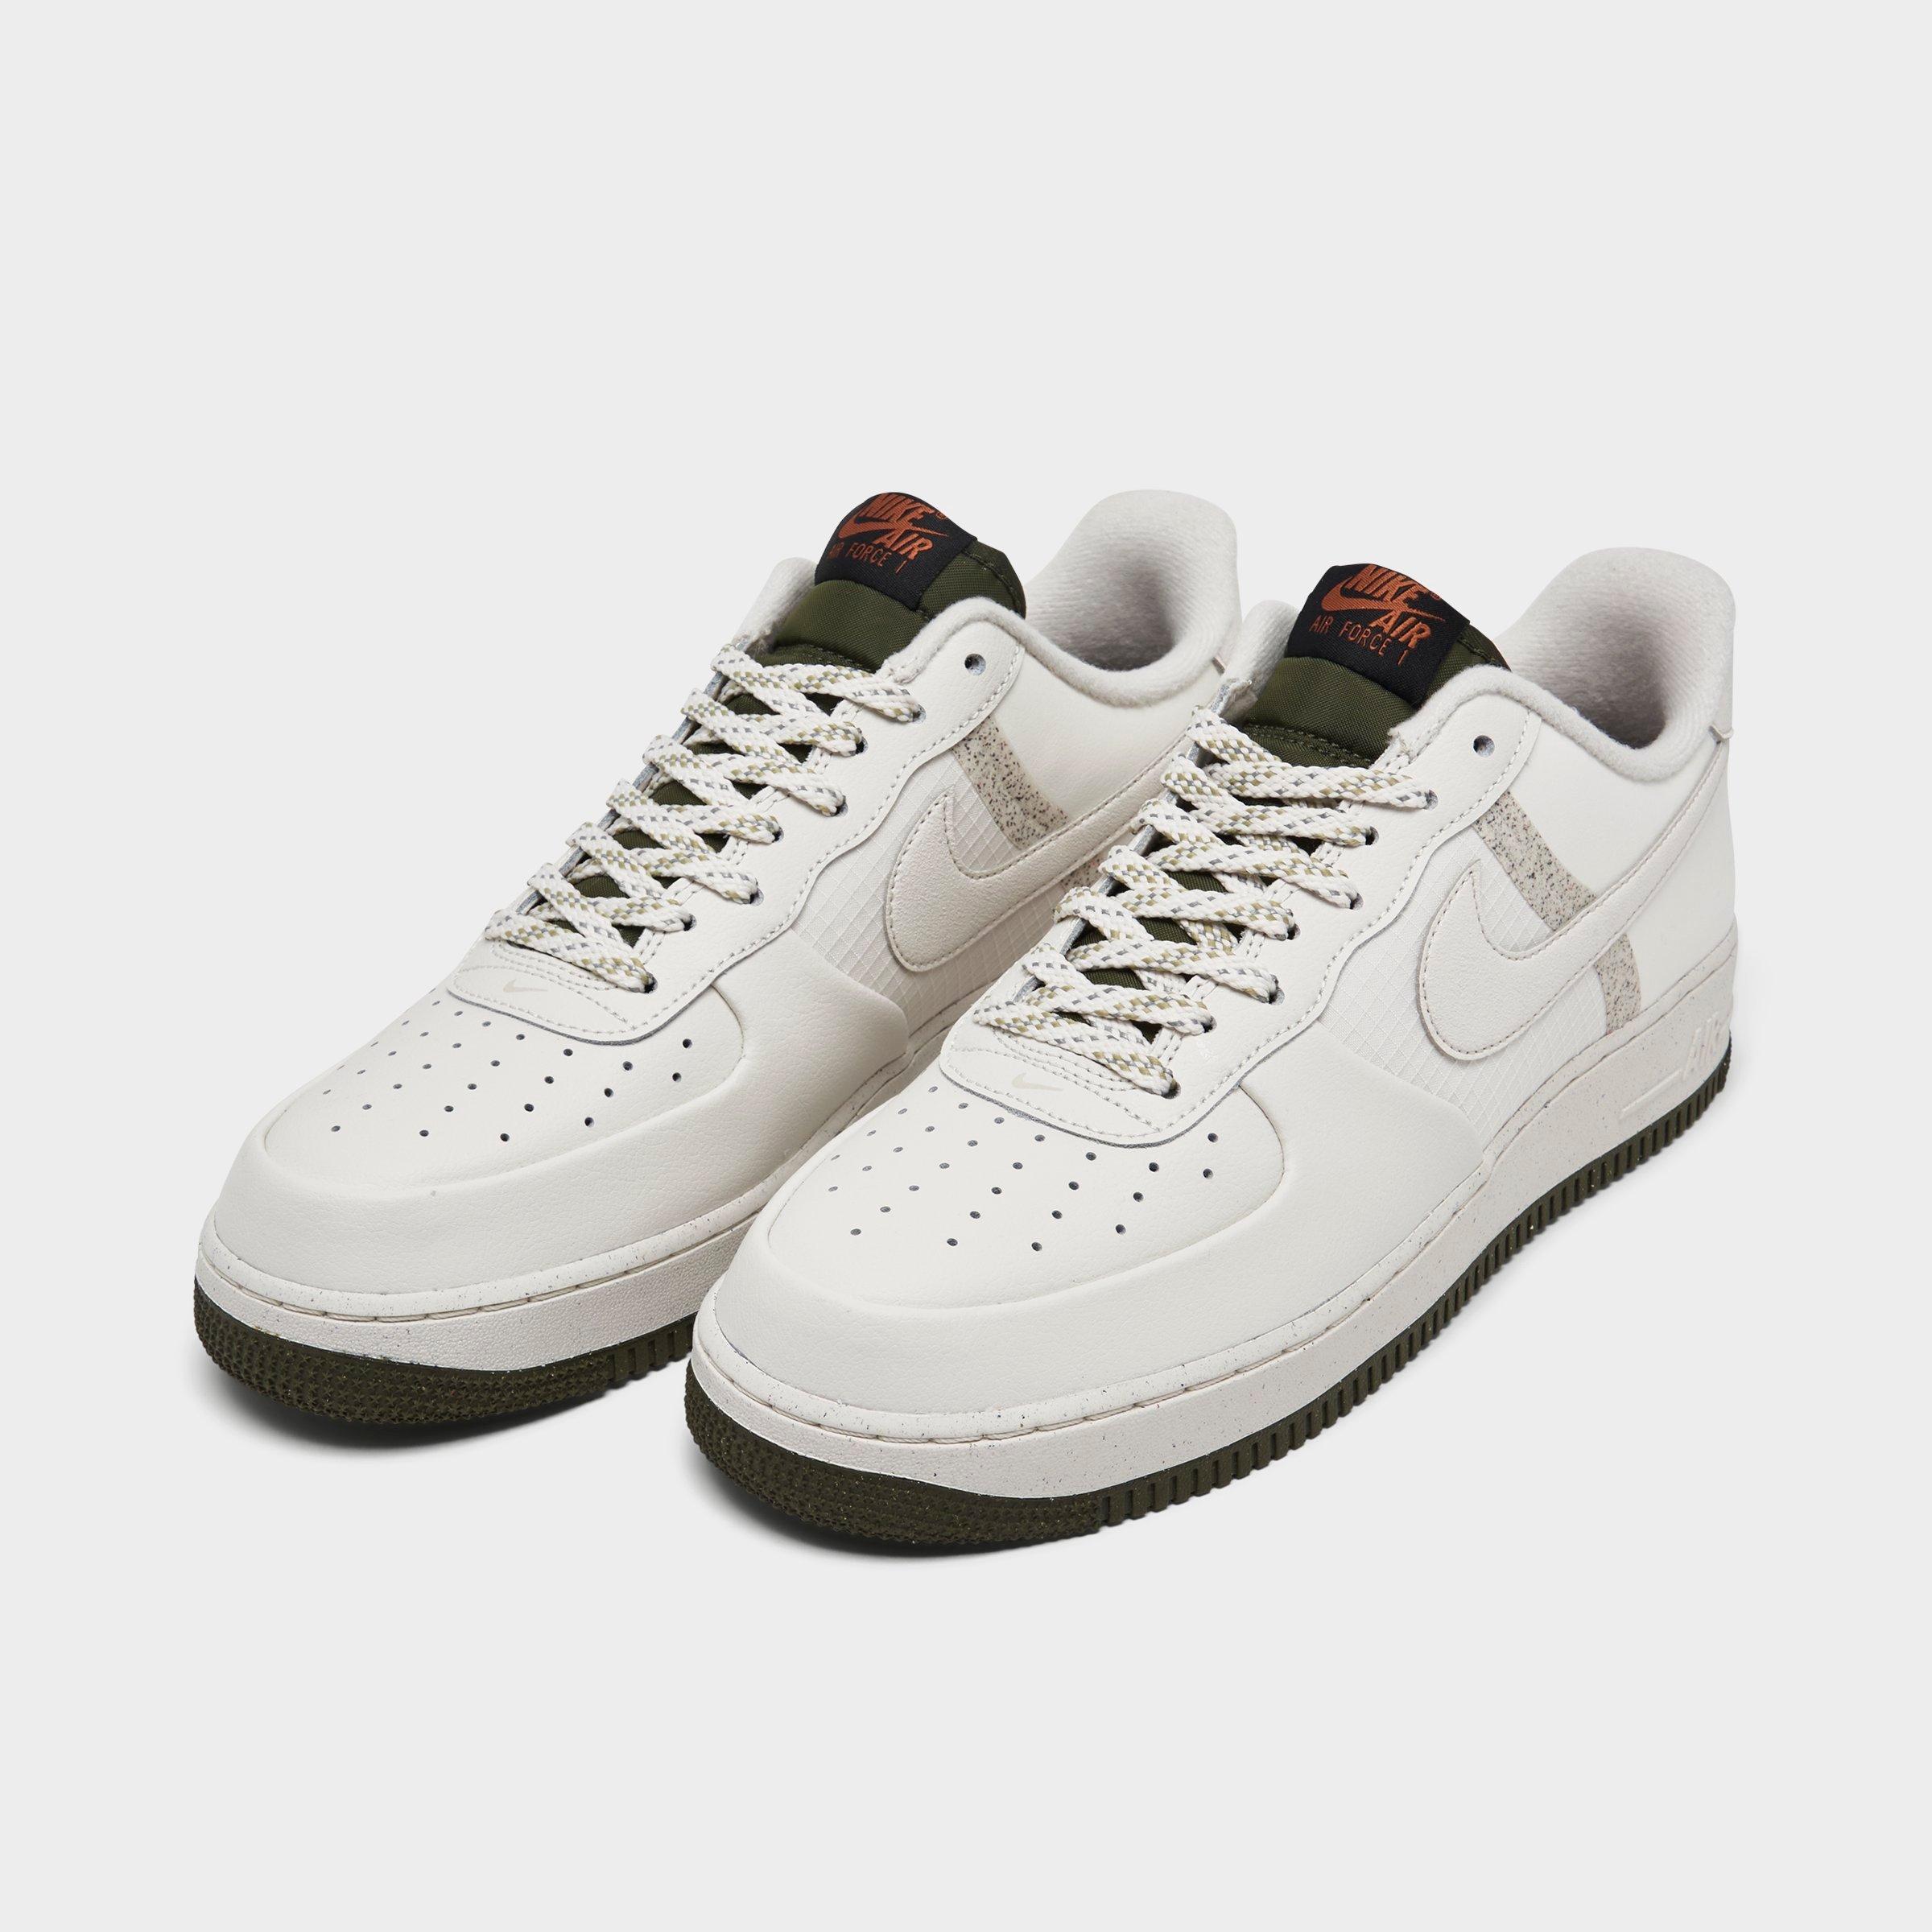 Men's Nike Air Force 1 '07 LV8 Winterized Low Casual Shoes| Finish Line